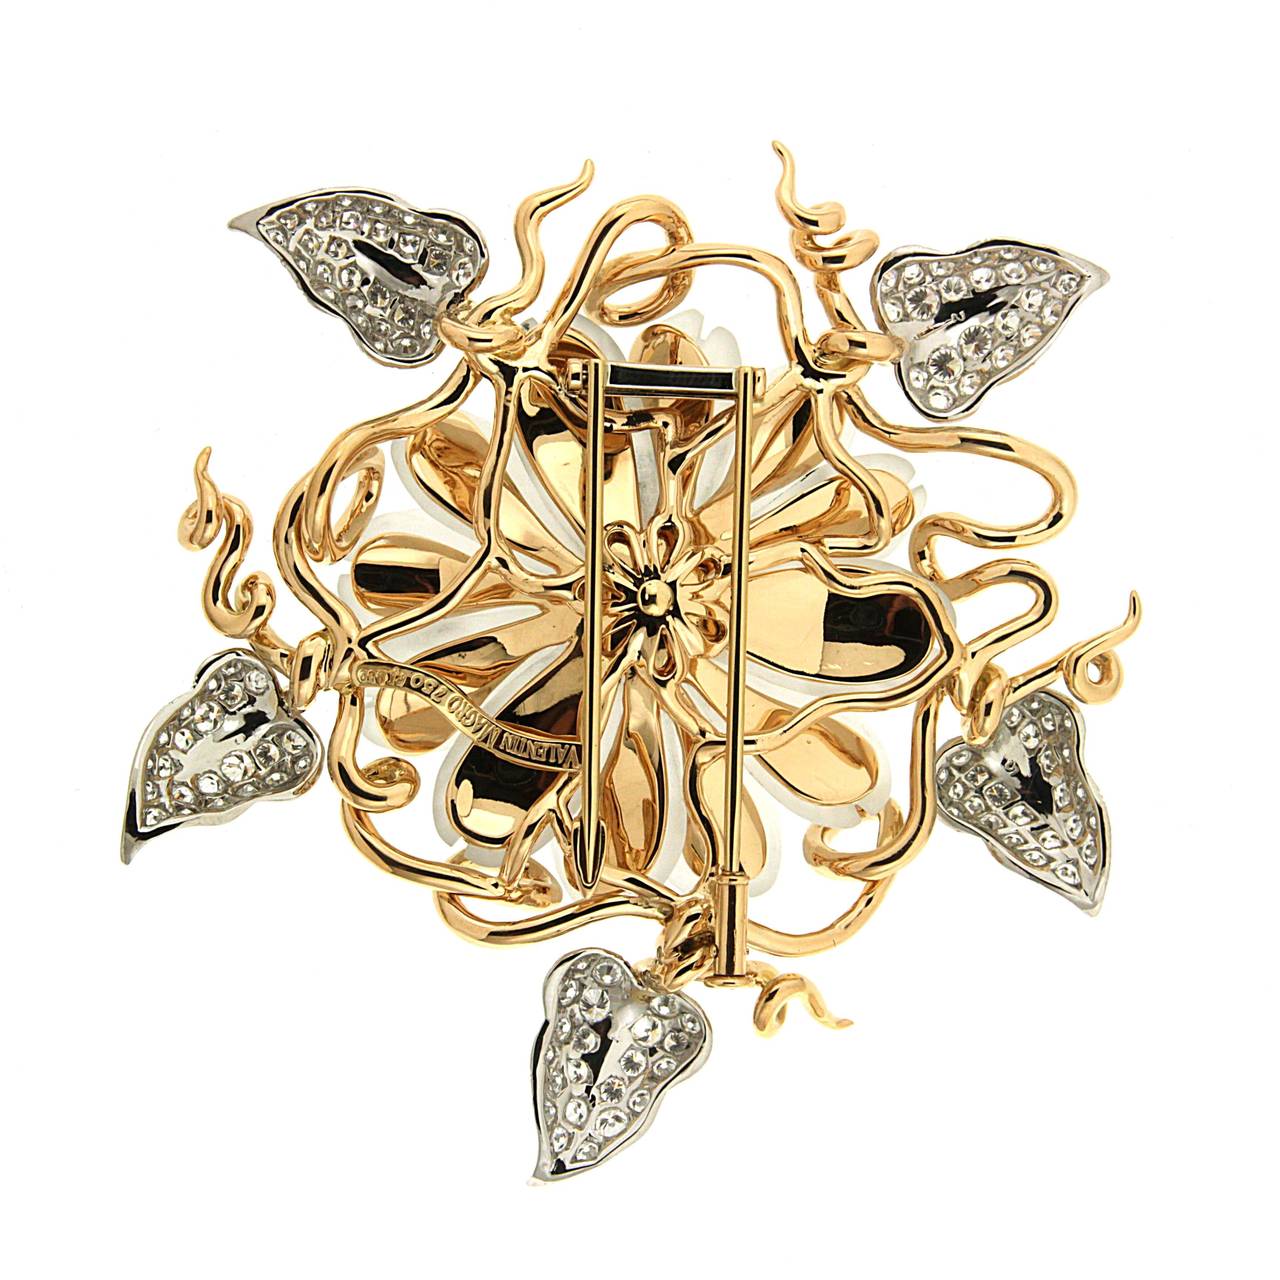 Elegant Flower brooch featuring hand carved crystal, featured with round brilliant diamonds set on the leaves and gold veins. This brooch is made in 18kt yellow gold.